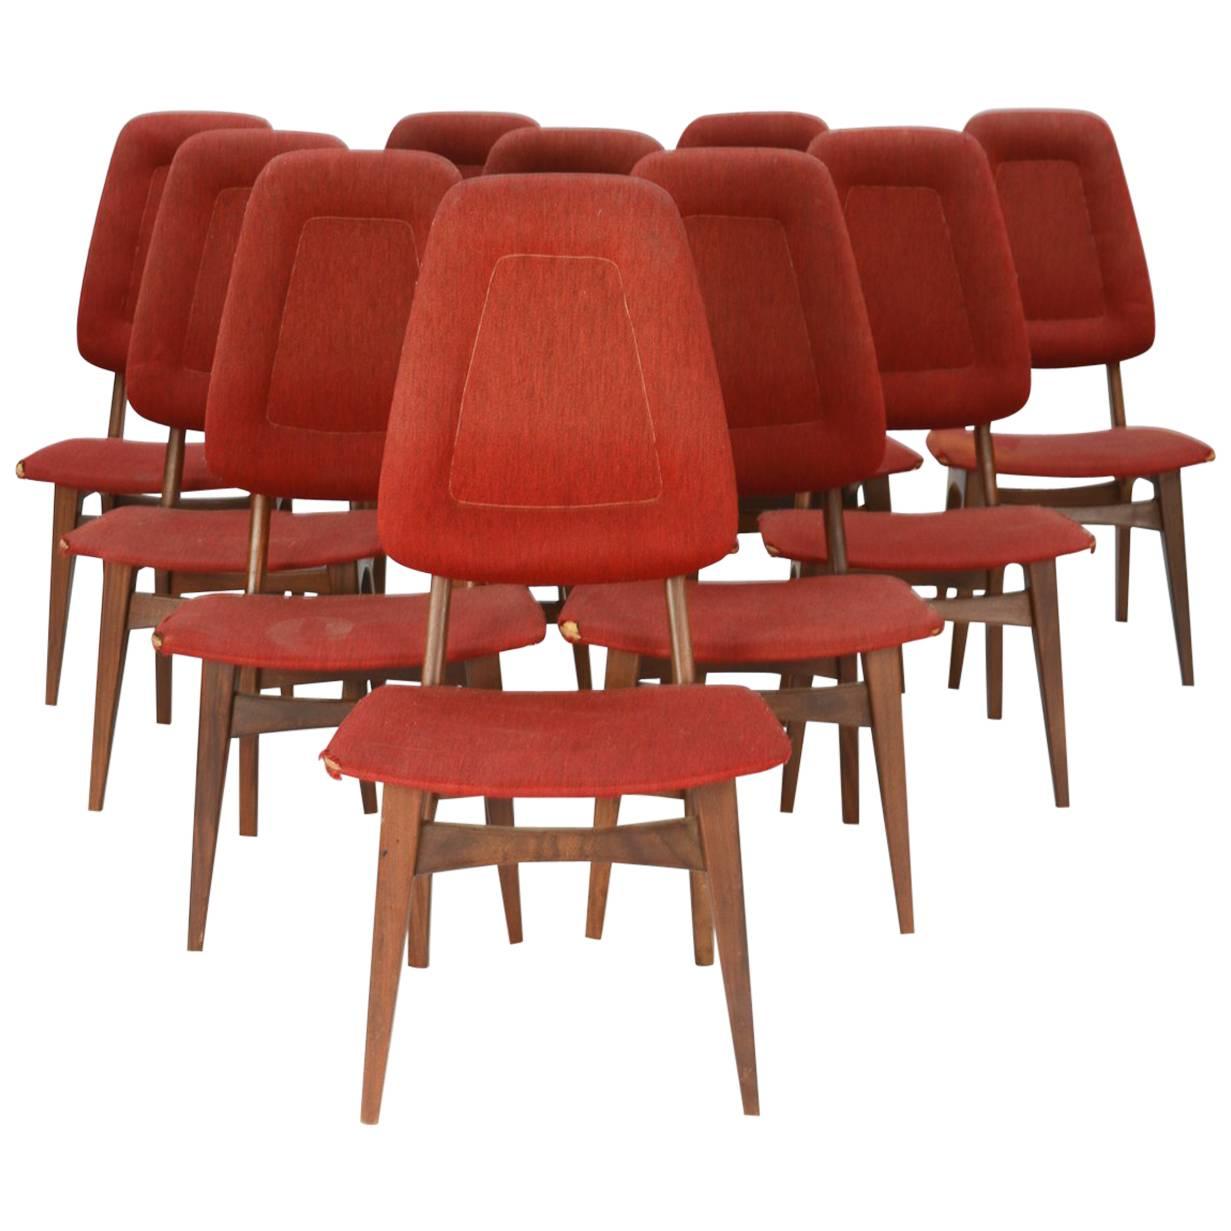 Up to 10 Sorheim Bruk High Back Dining Chairs with Walnut Frames 1960 For Sale